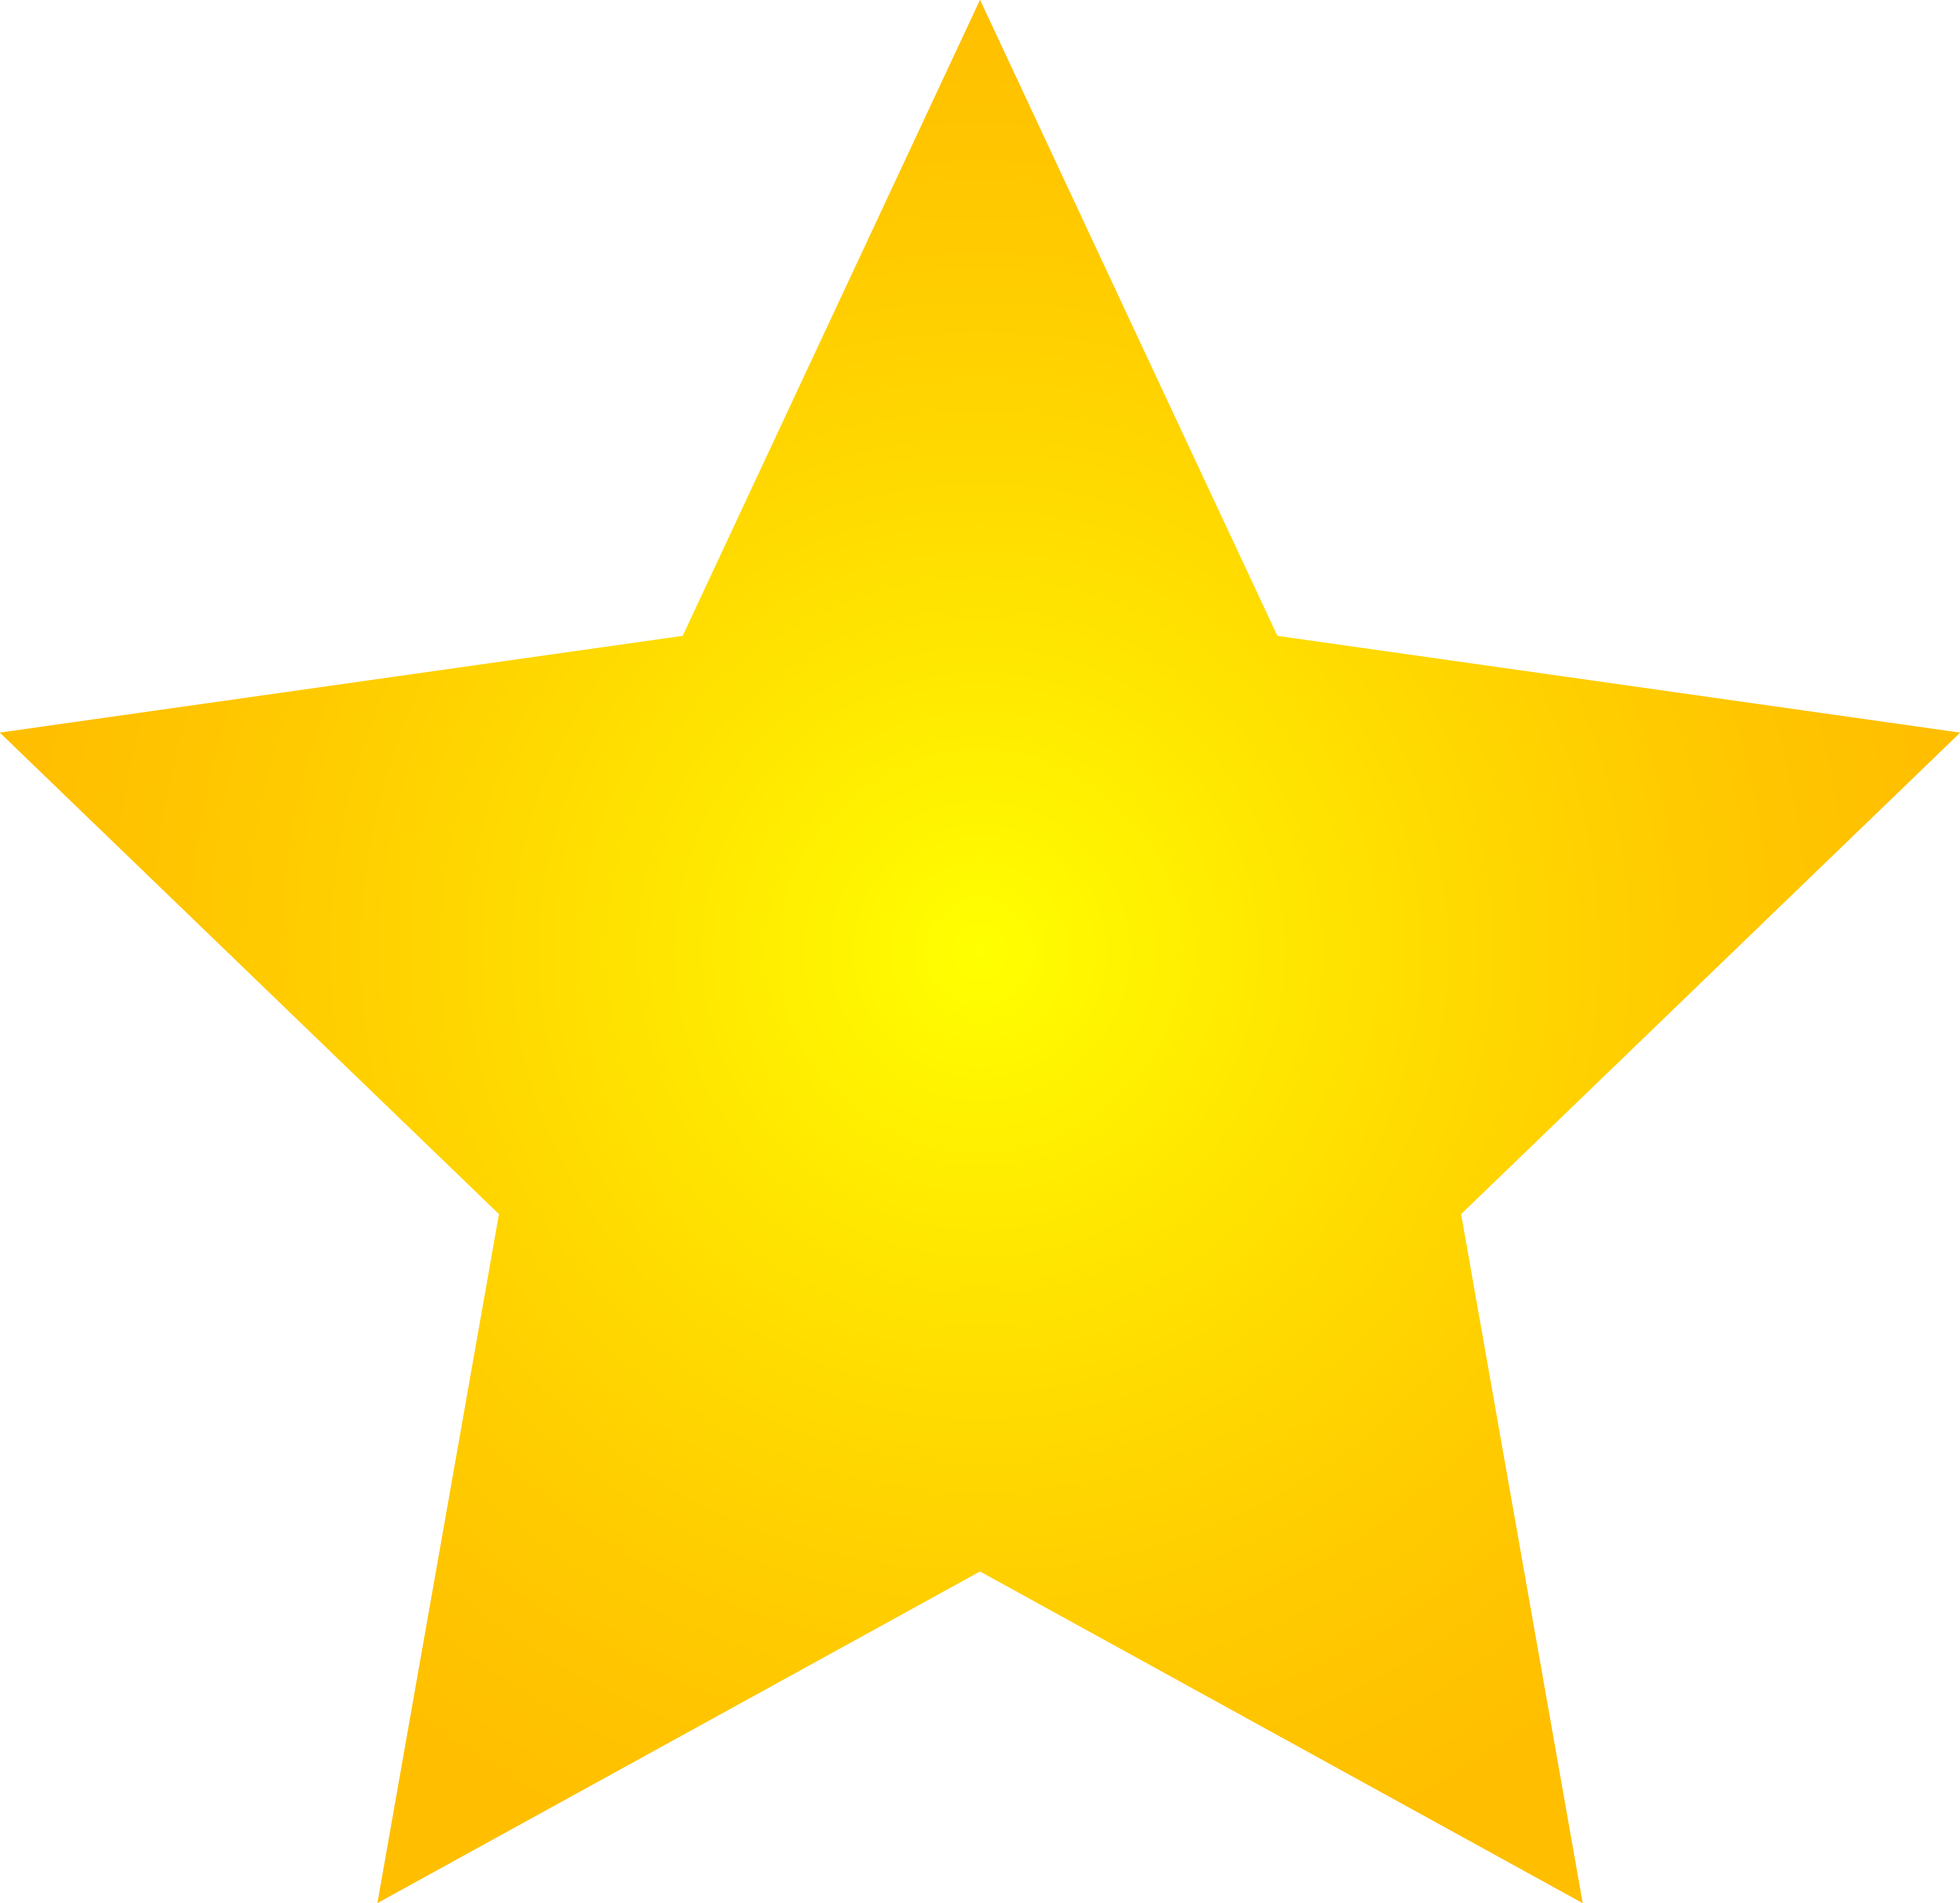 Yellow Star On Black Background Clipart - Free to use Clip Art ...